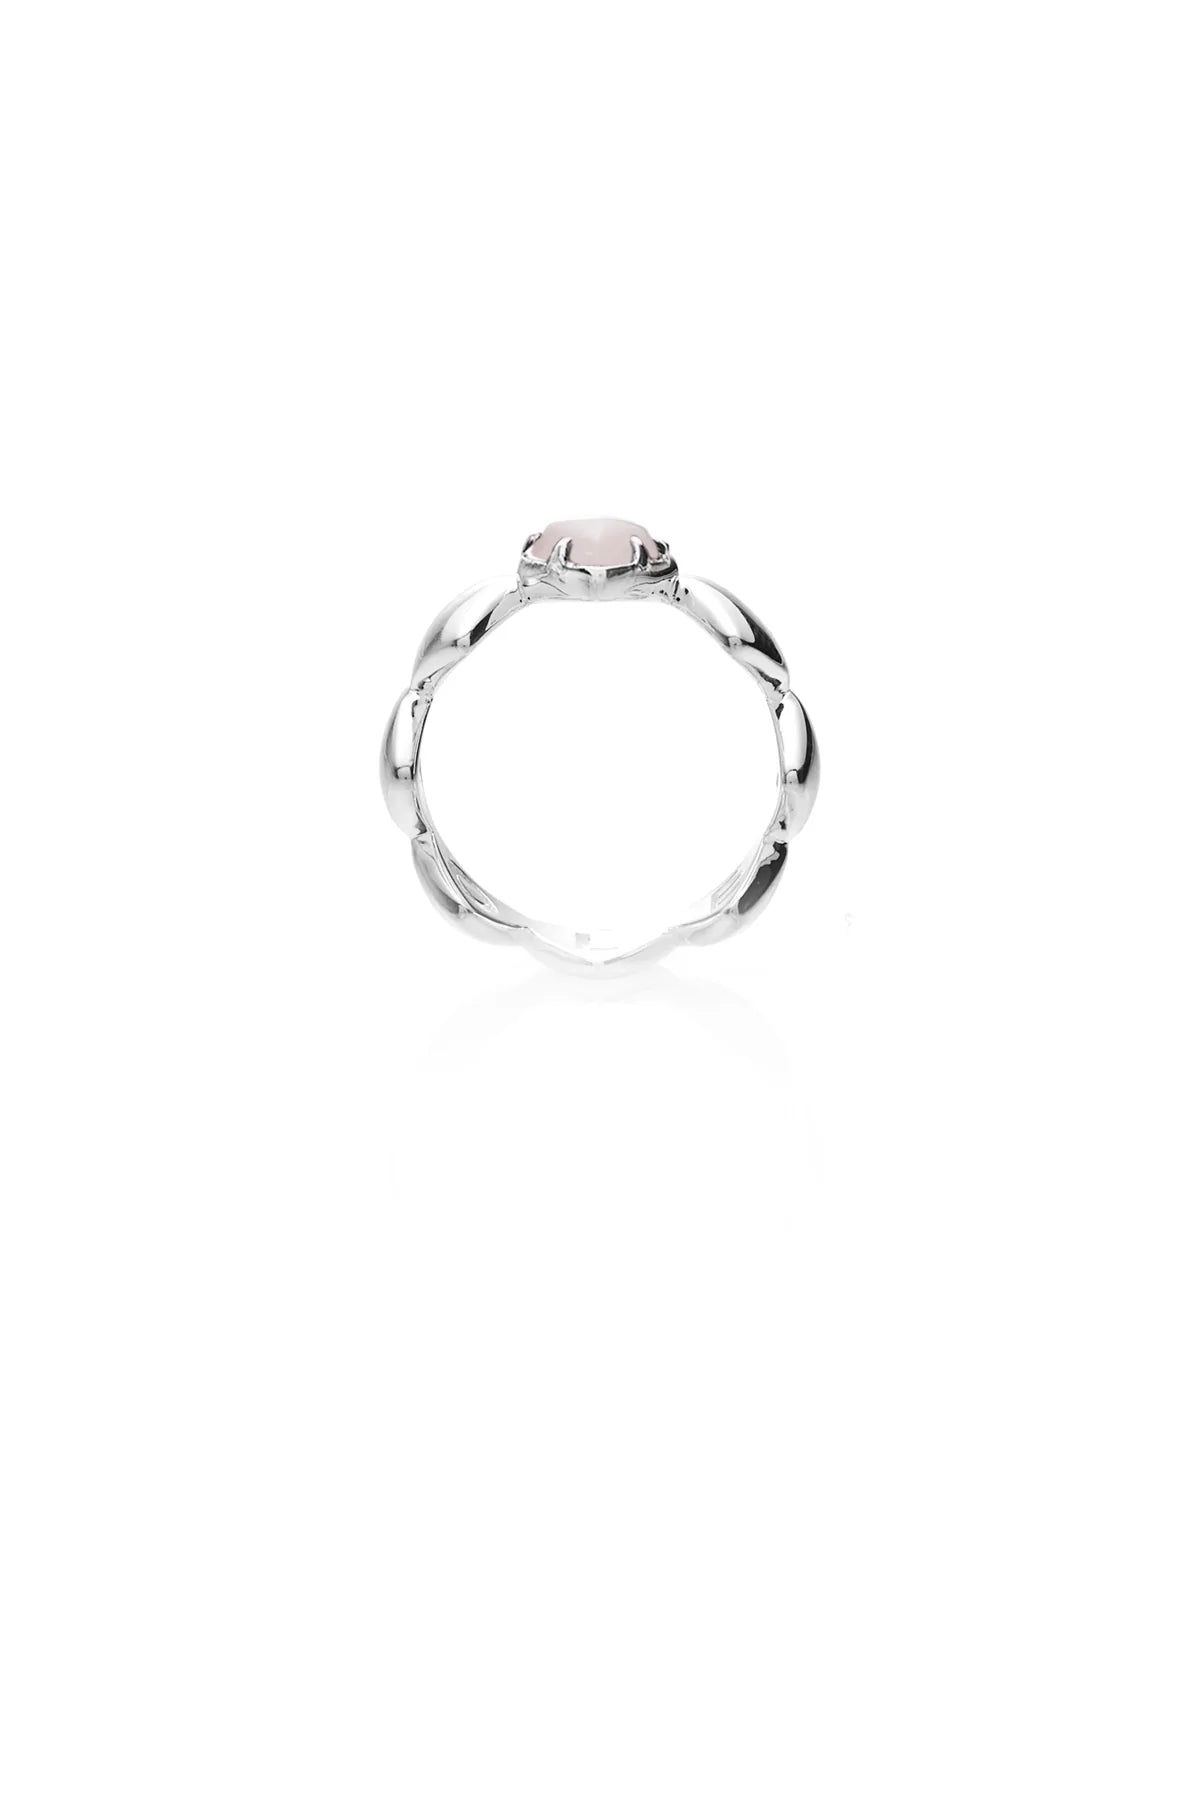 Band of Hearts Ring By Stolen Girlfriends Club - Rose Quartz